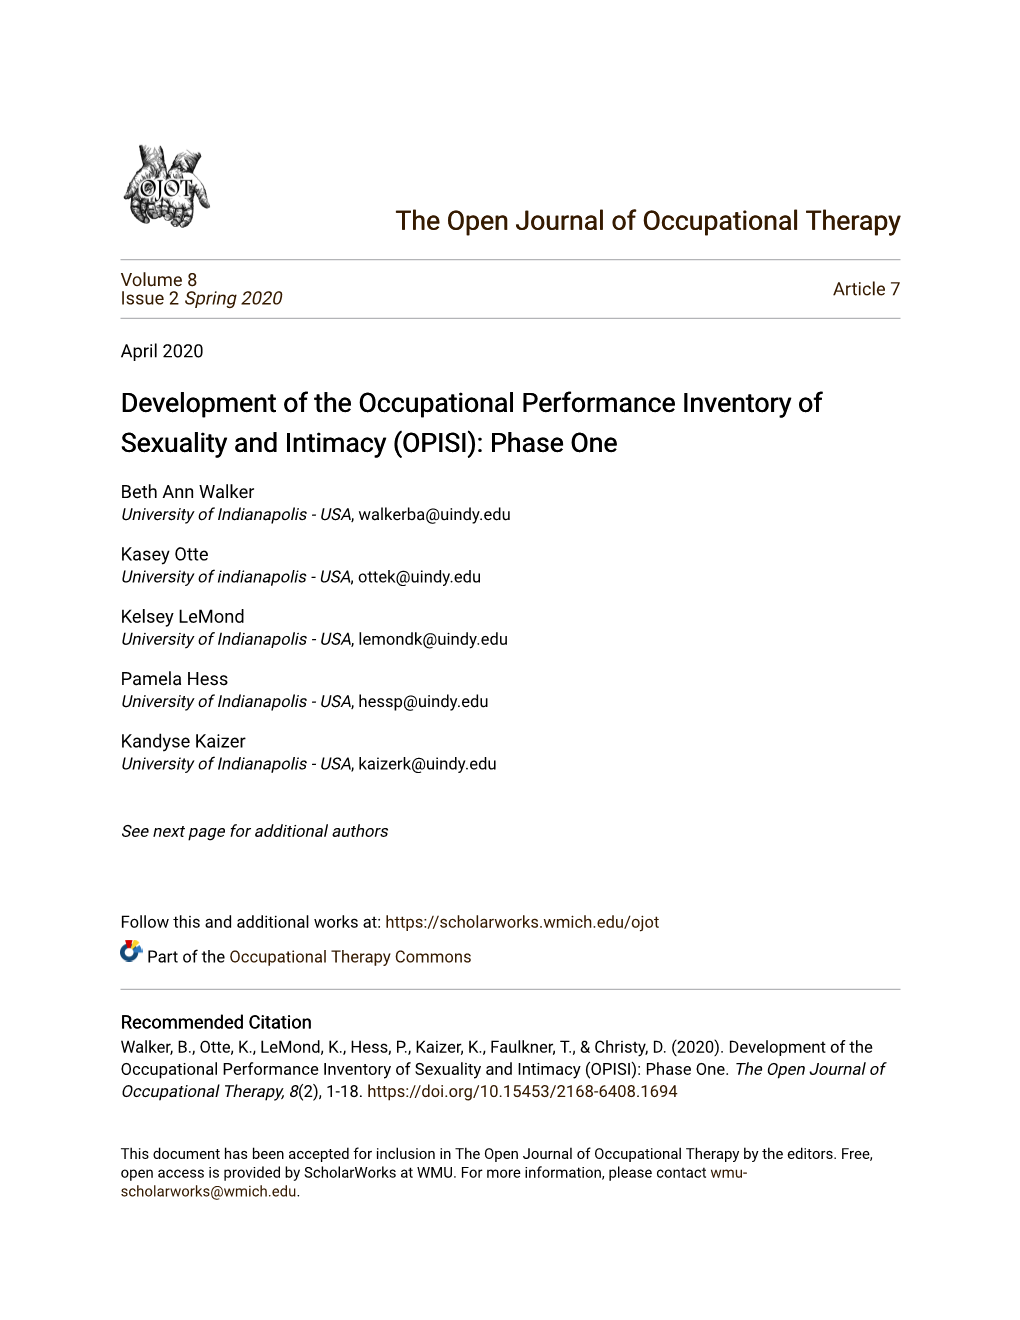 Development of the Occupational Performance Inventory of Sexuality and Intimacy (OPISI): Phase One